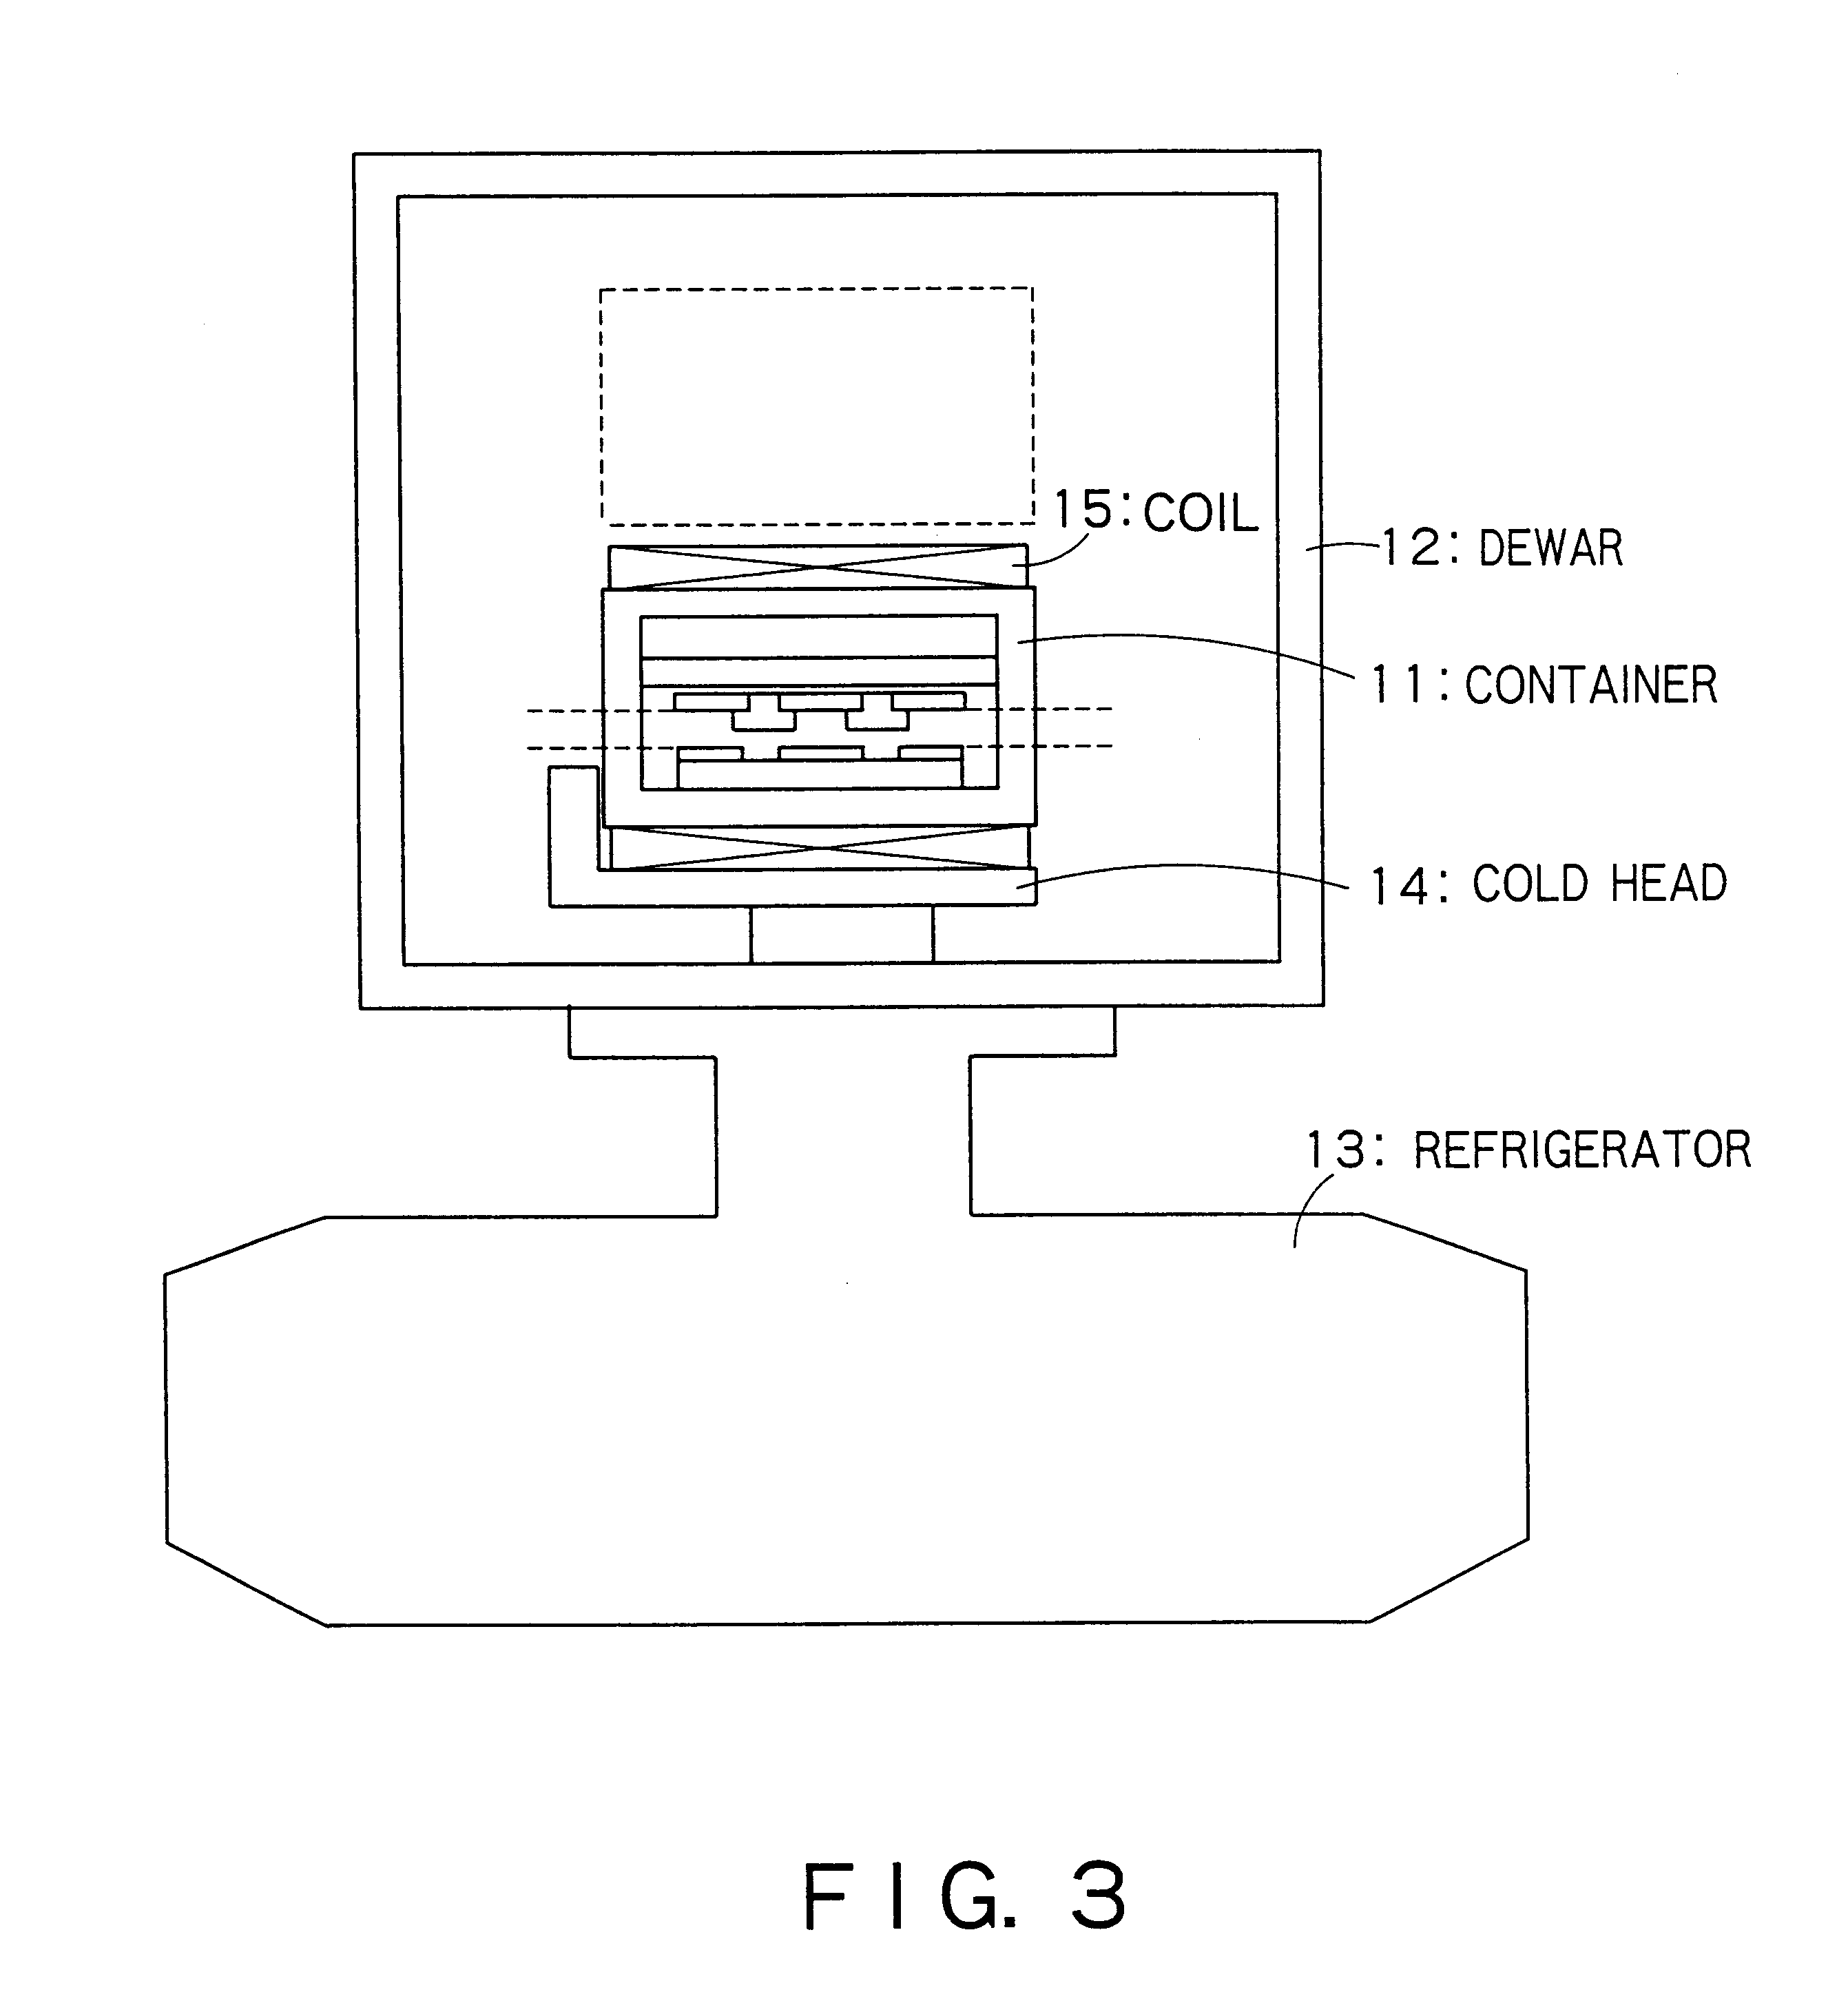 Planar filter and filter system using a magnetic tuning member to provide permittivity adjustment